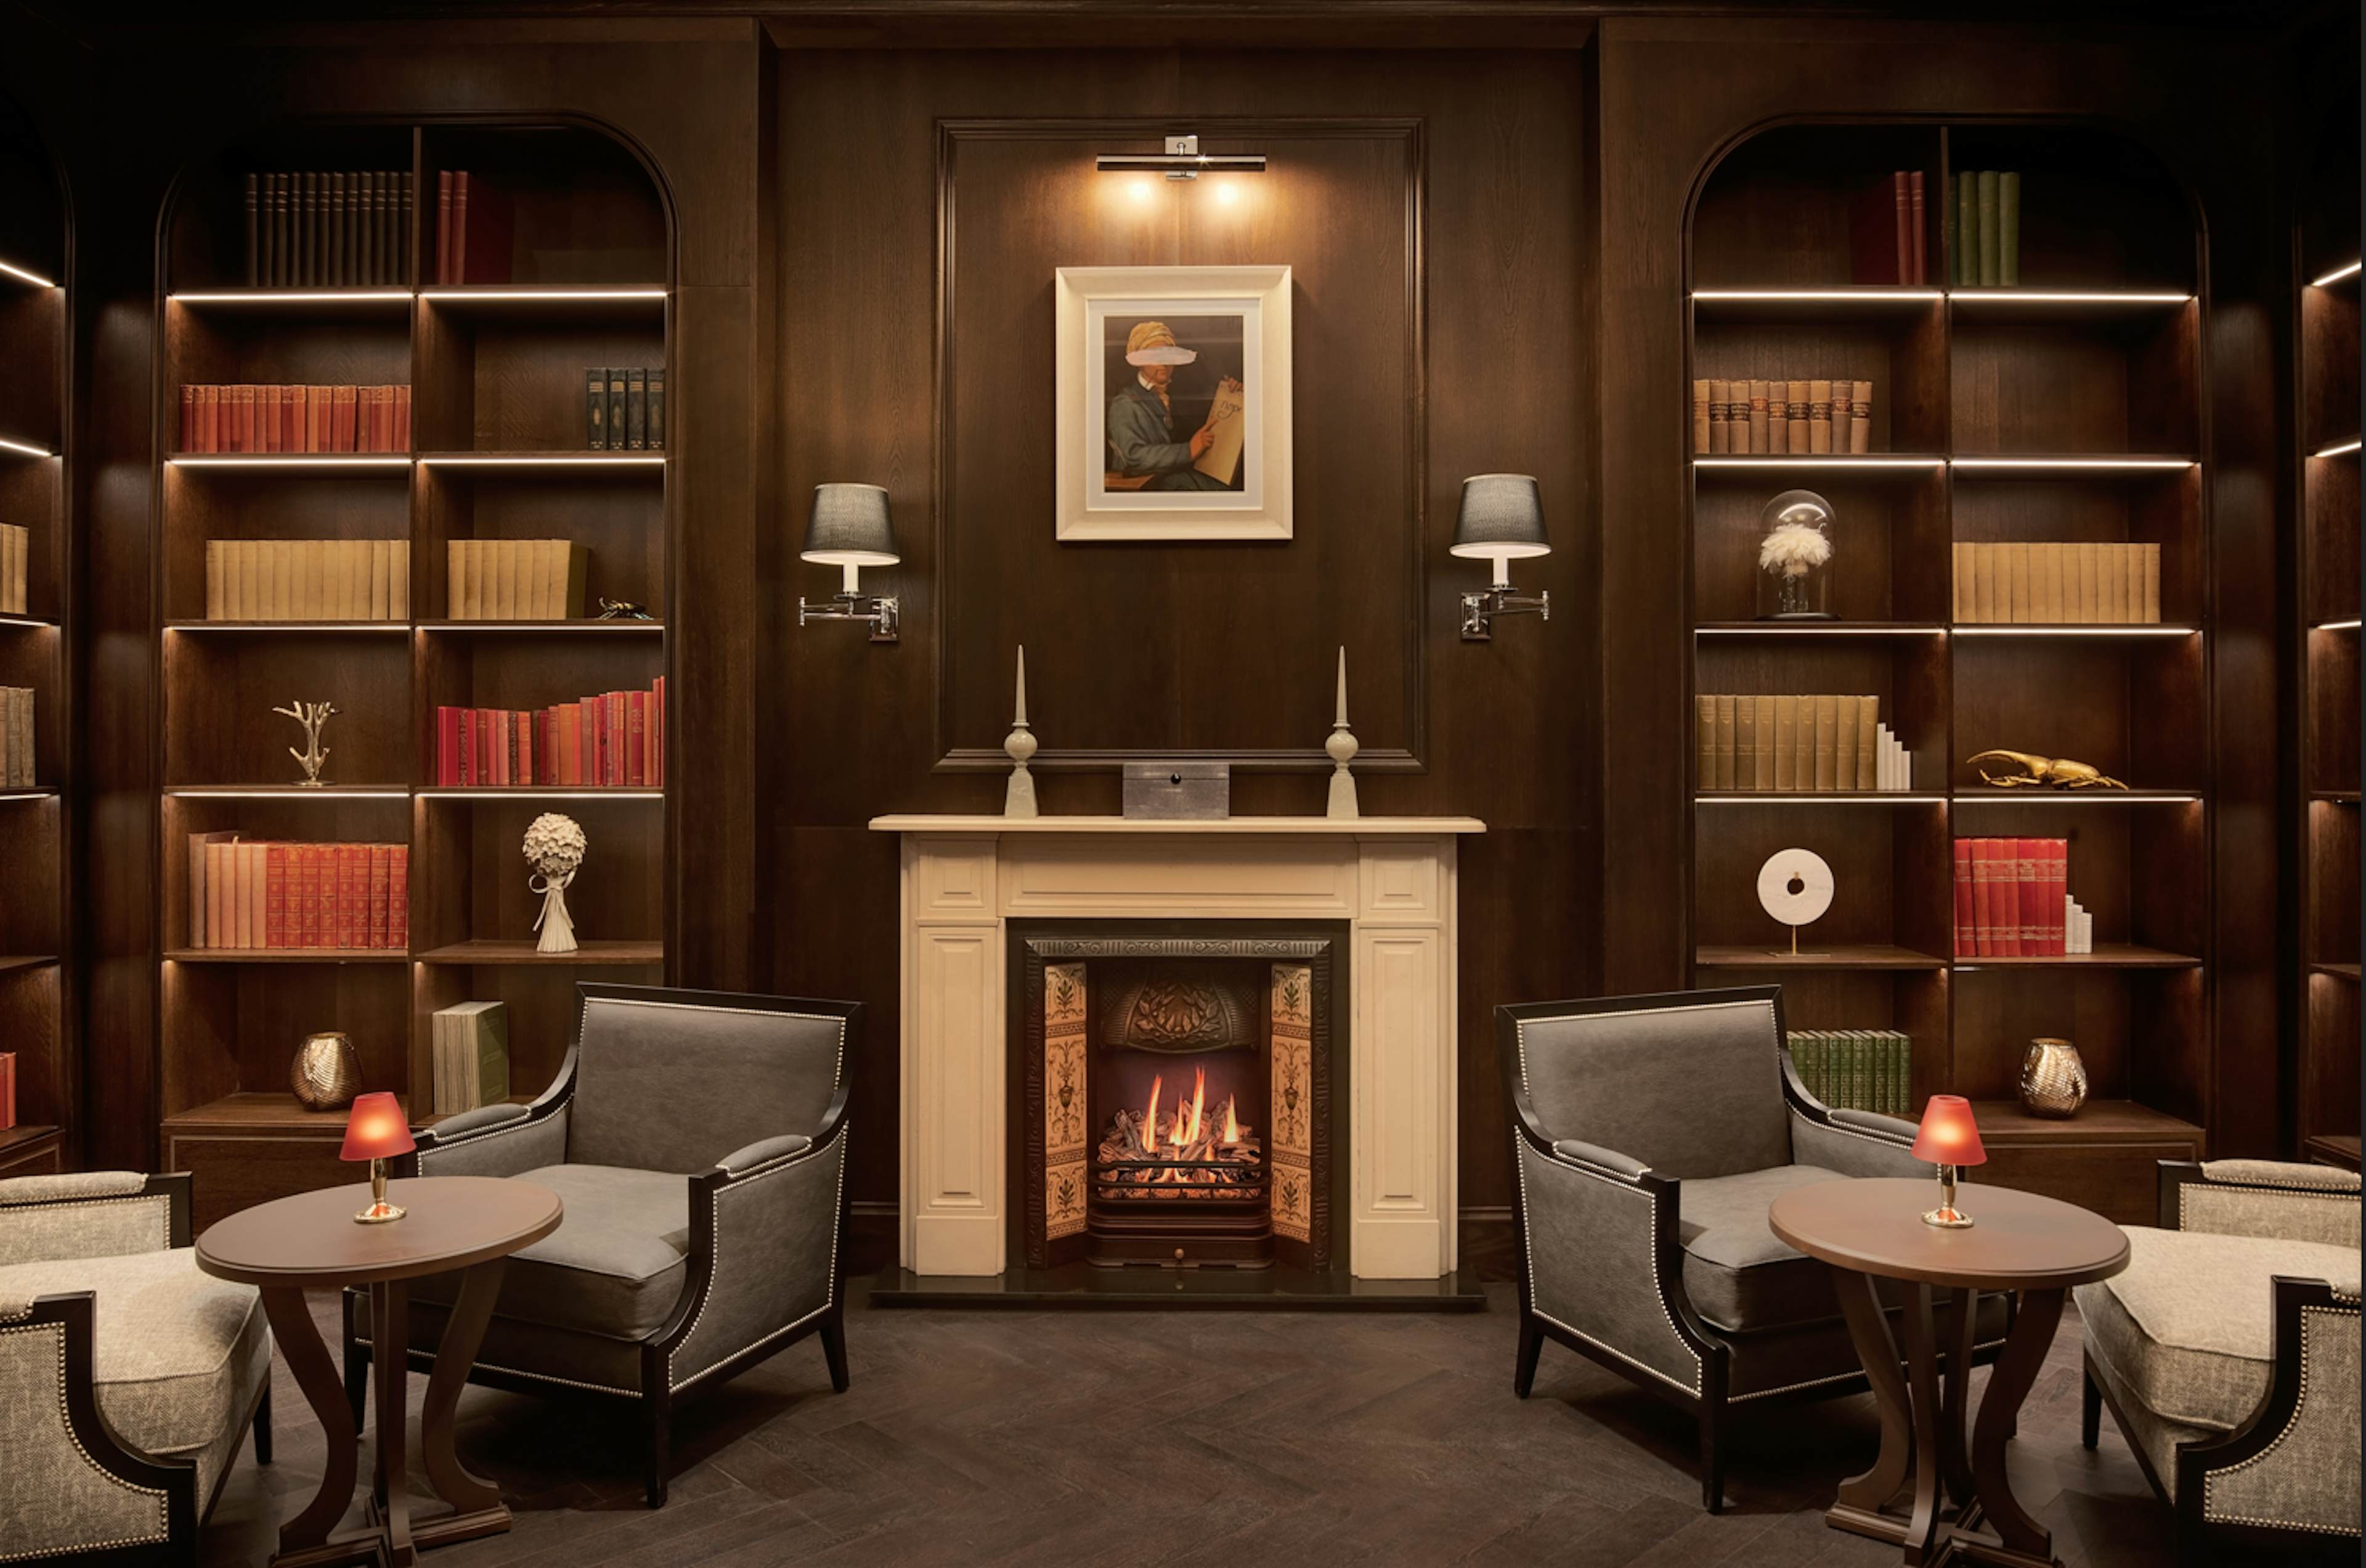 Fairmont Windsor Park - The Library Club image 2